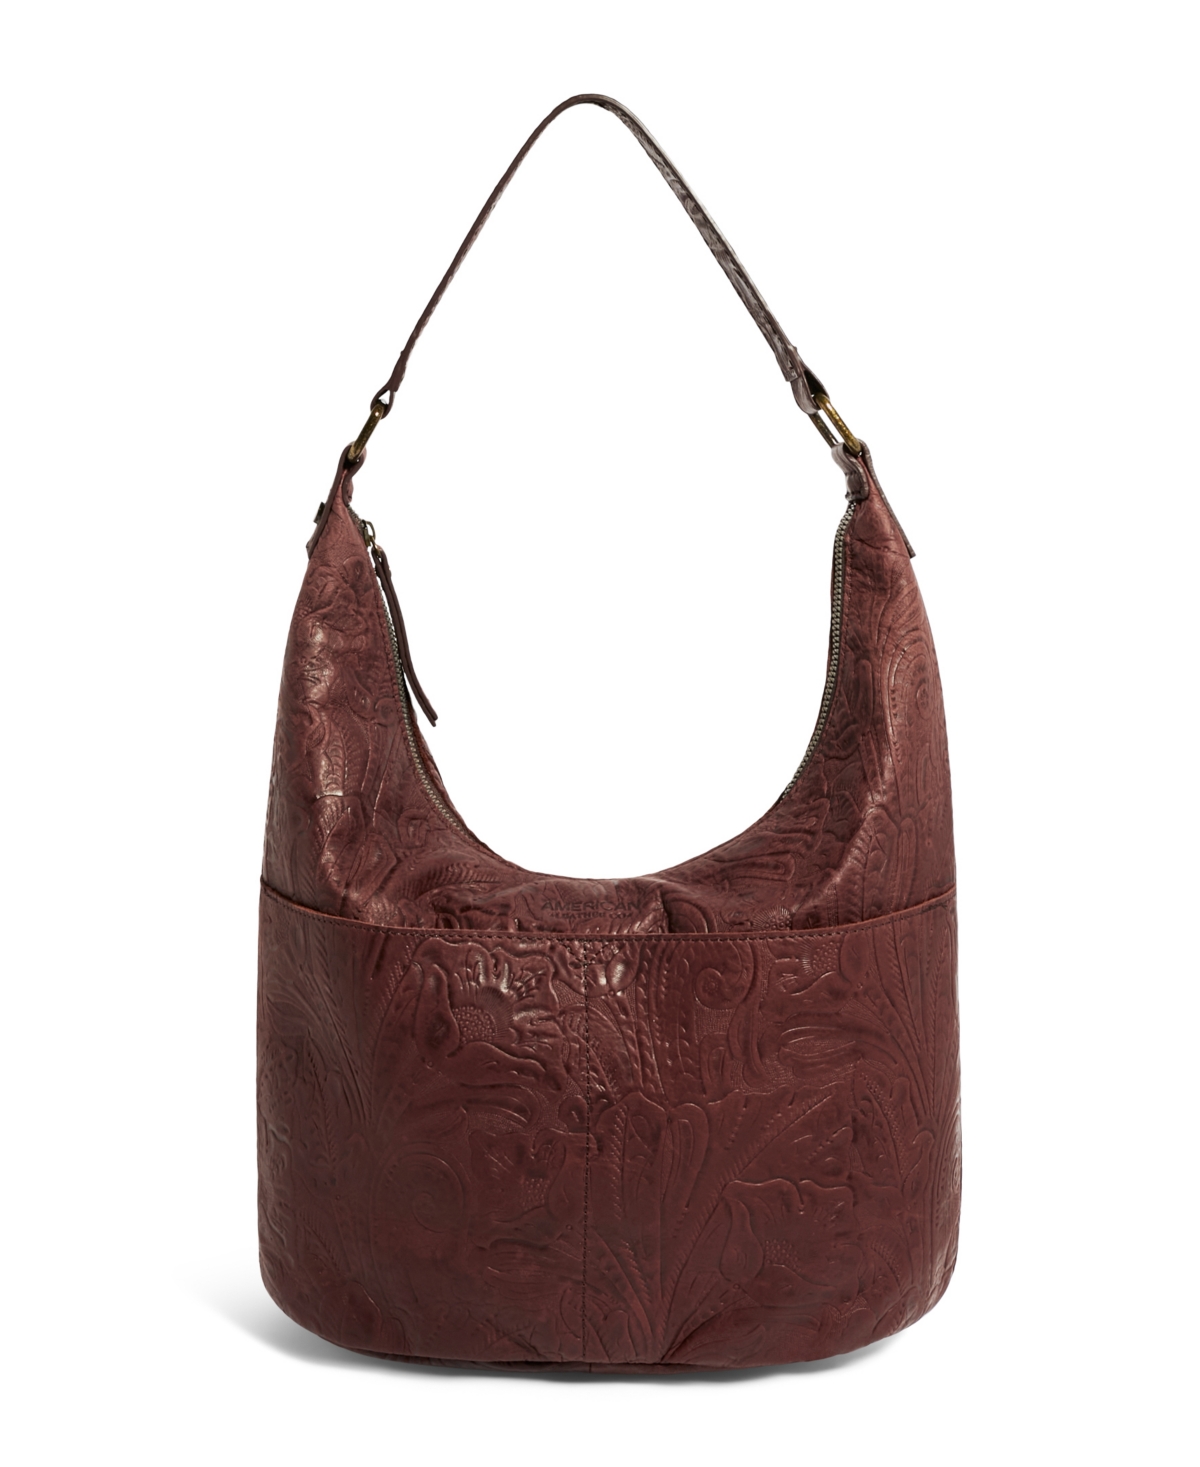 American Leather Co. Carrie Hobo Bag In Cordovan Tooled